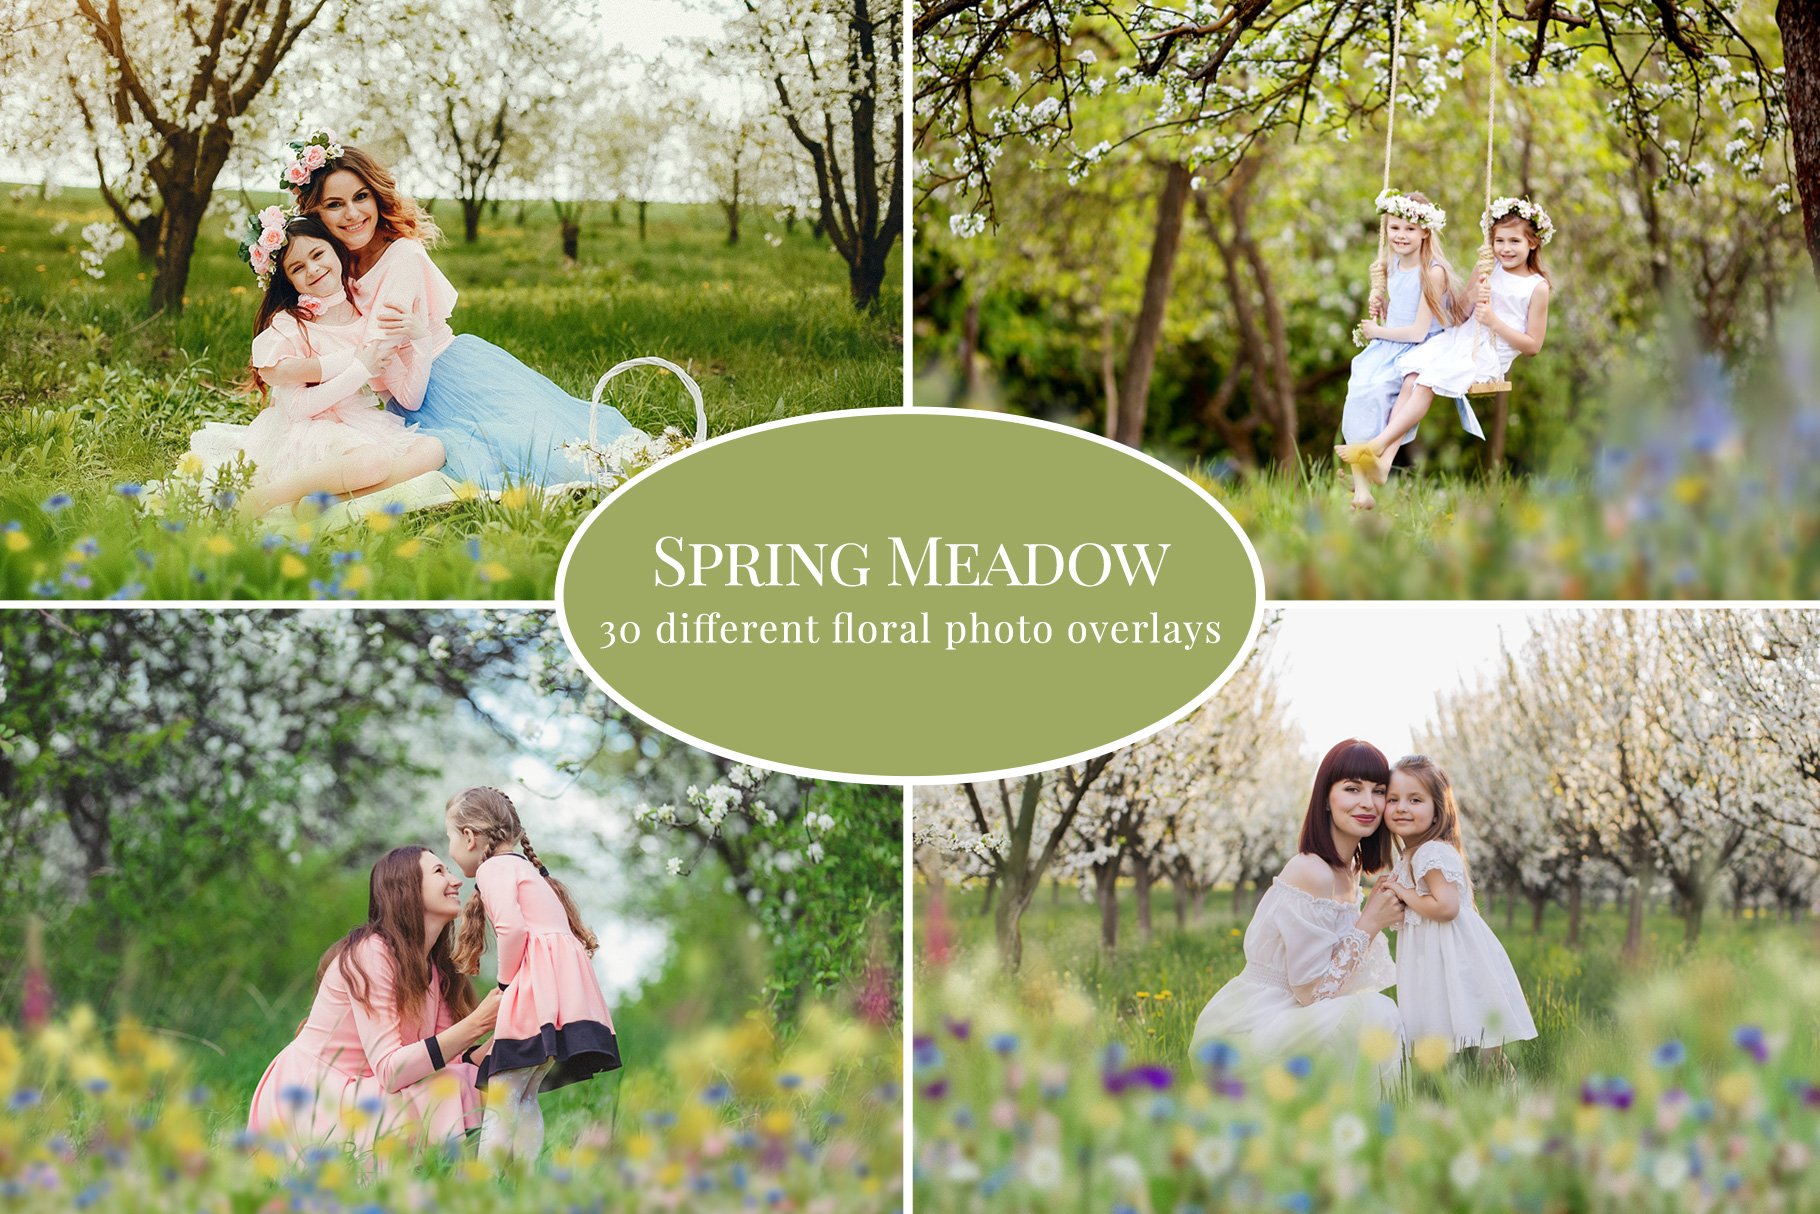 Spring Meadow photo overlayscover image.